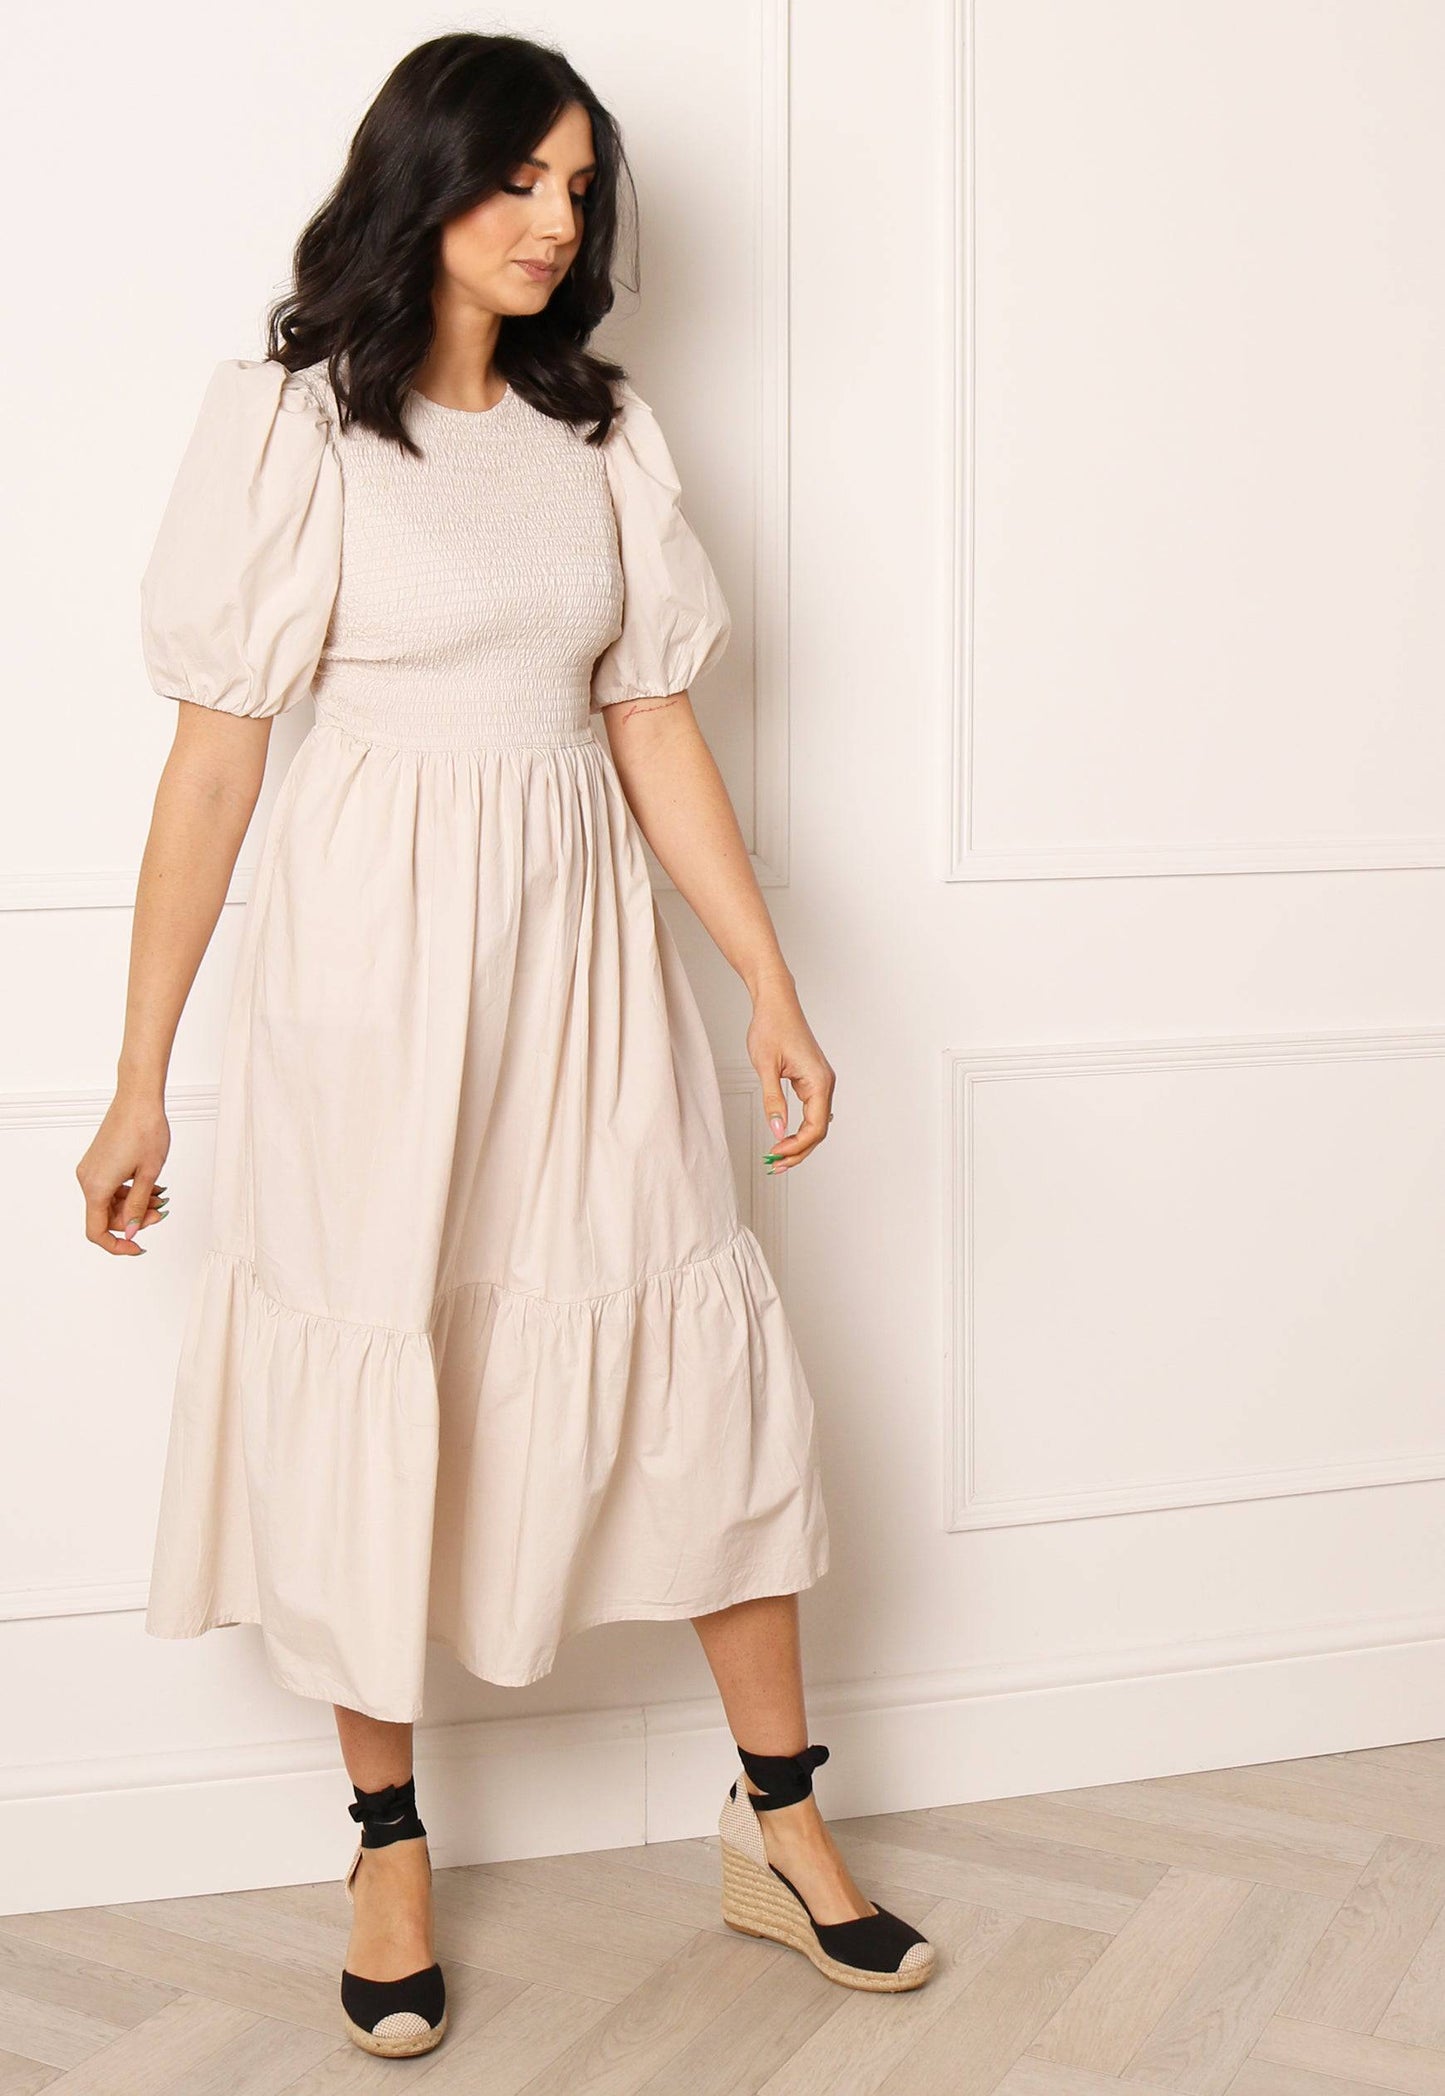 ONLY Shirred Top Cotton Tiered Midi Dress in Soft Beige - concretebartops